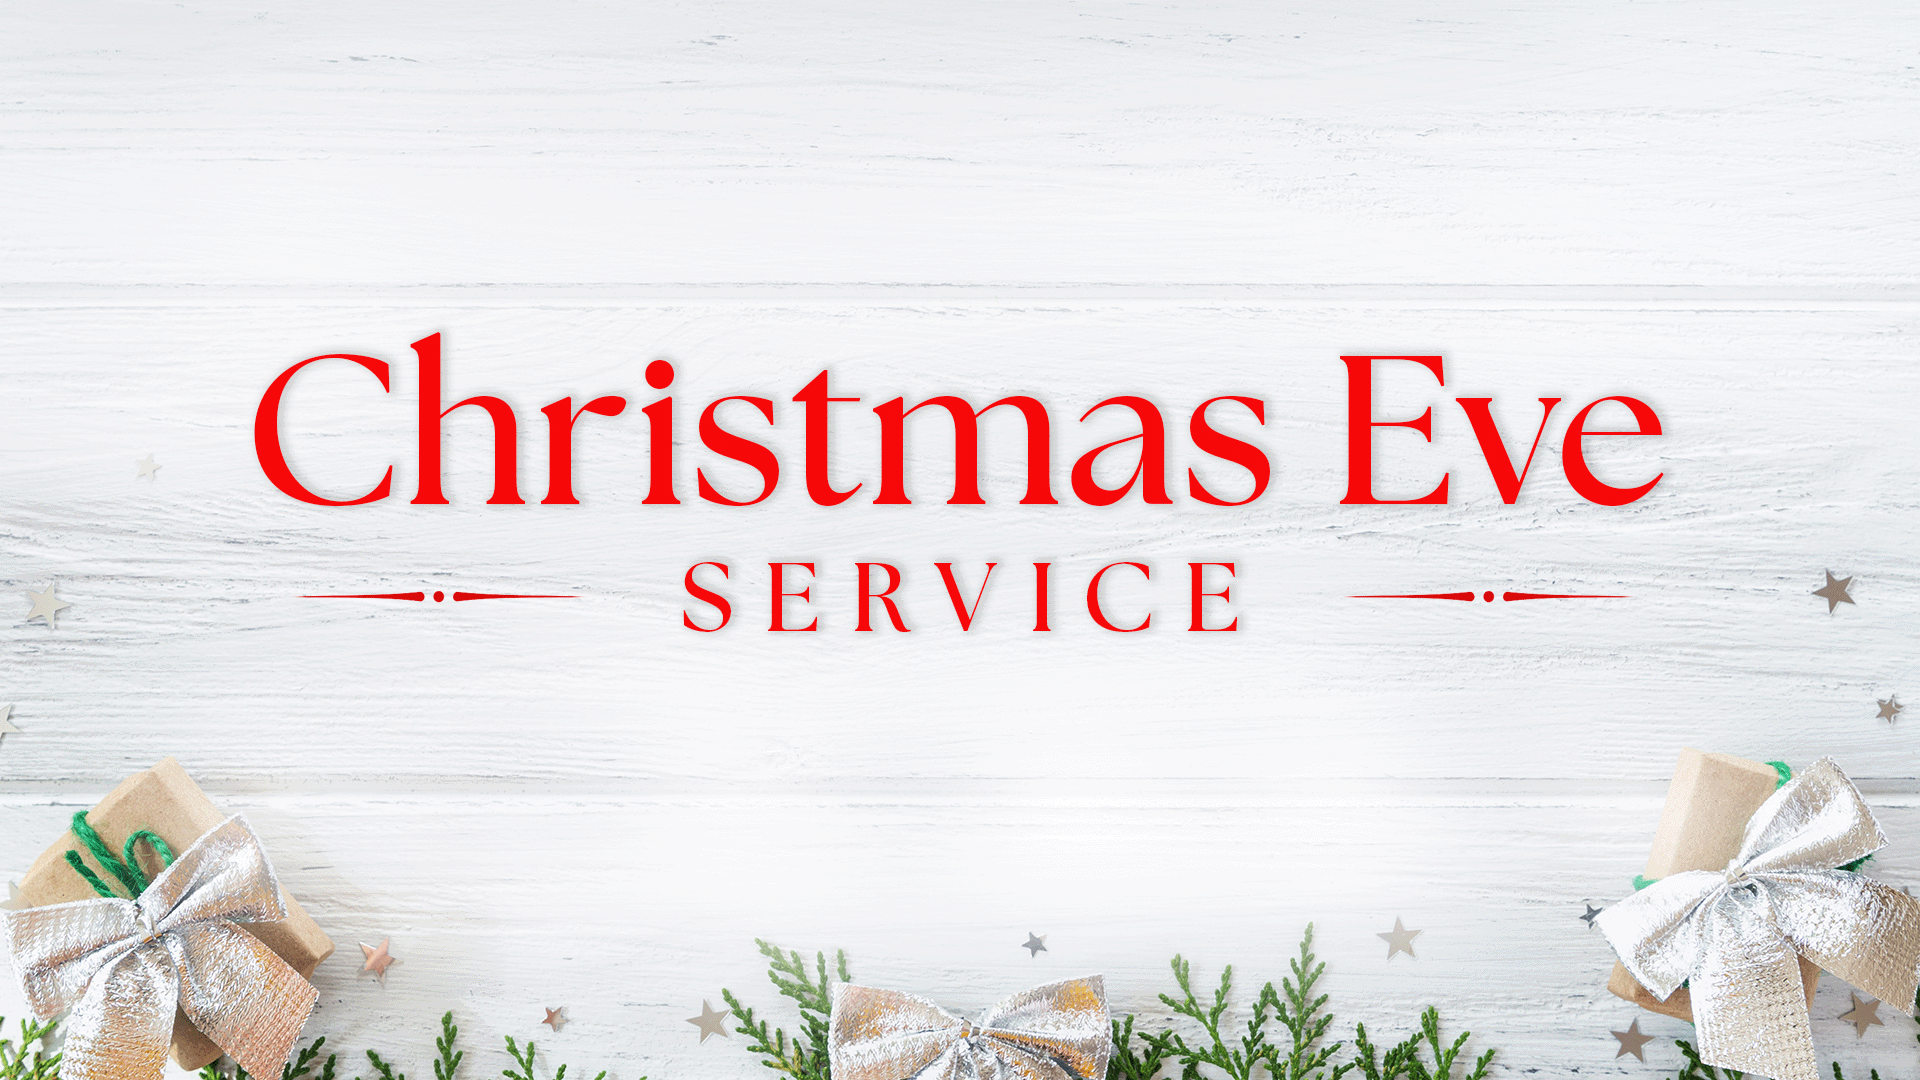 Christmas Eve Service Flyer Corporate Identity Template, 44% OFF